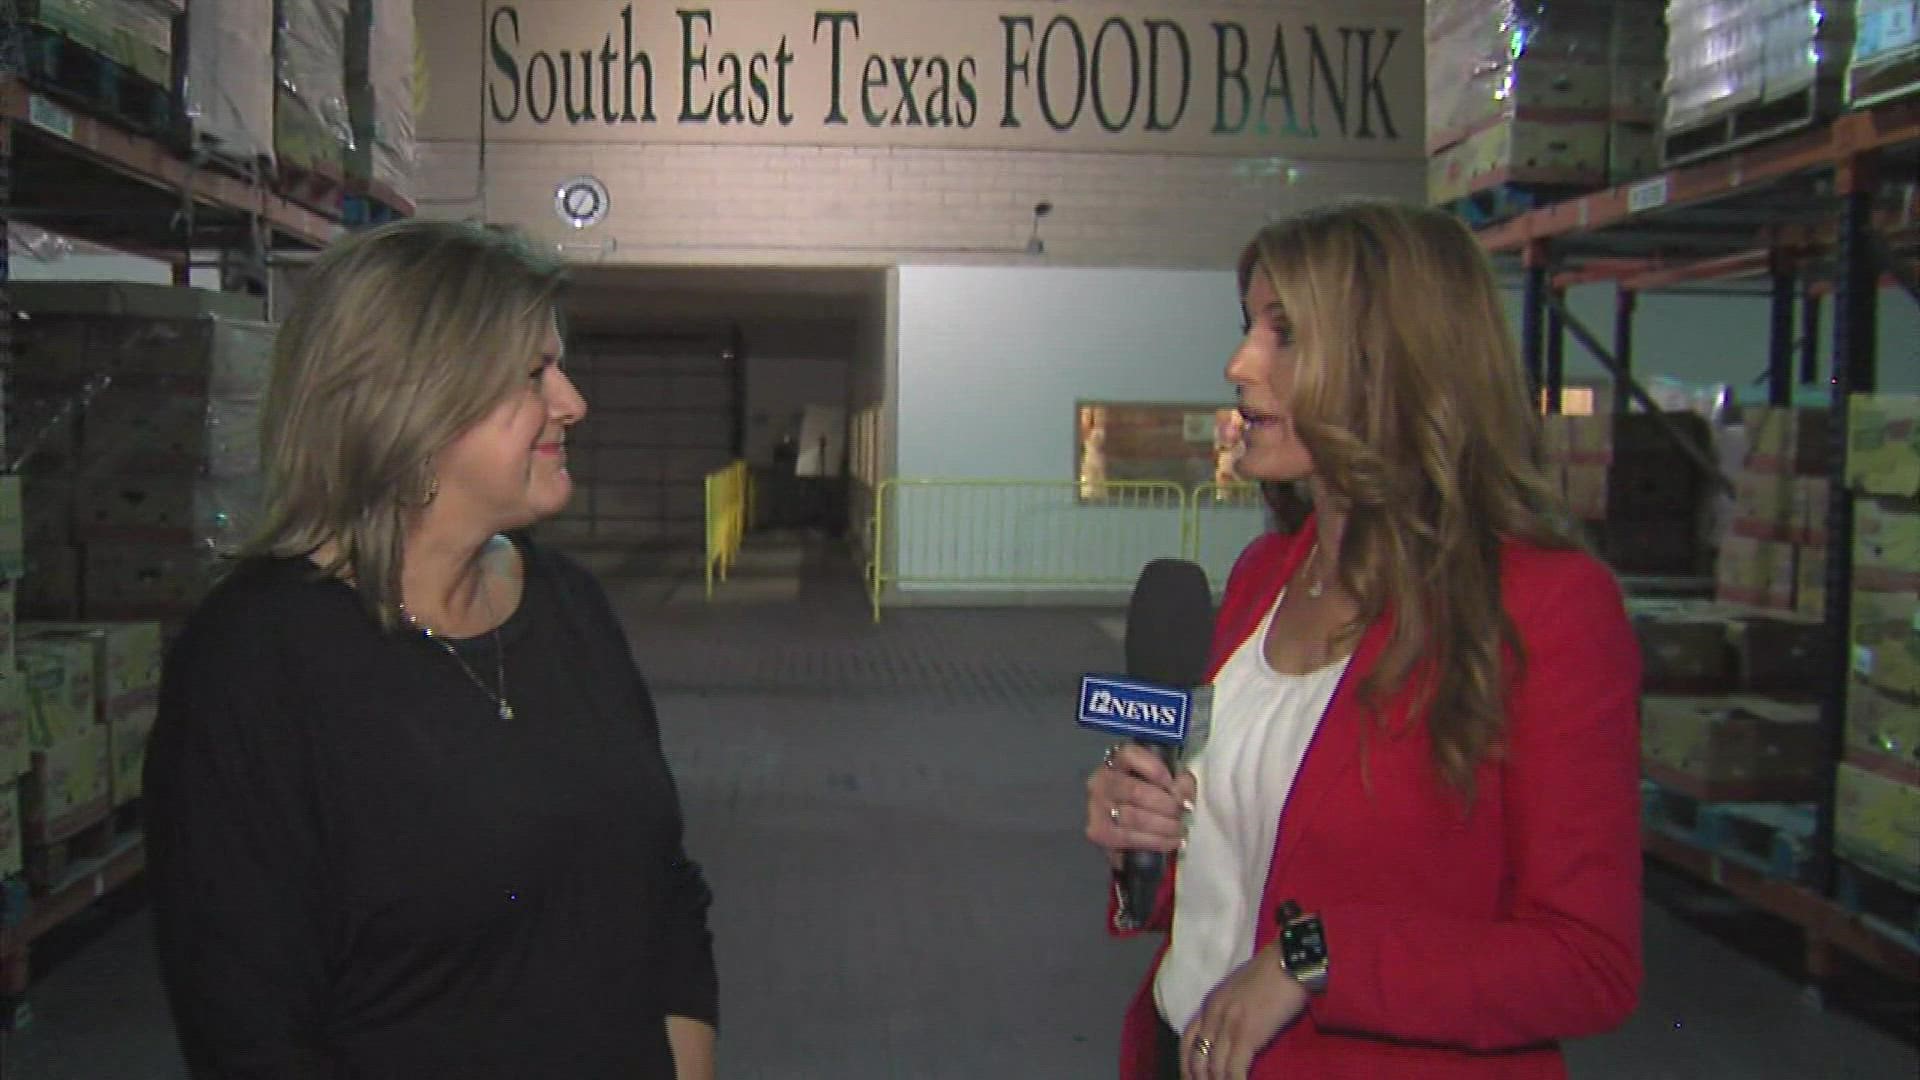 The Southeast Texas Food Bank is helping families across Southeast Texas that are struggling over the holidays but will need help. Visit SETXFoodBank.org for more.